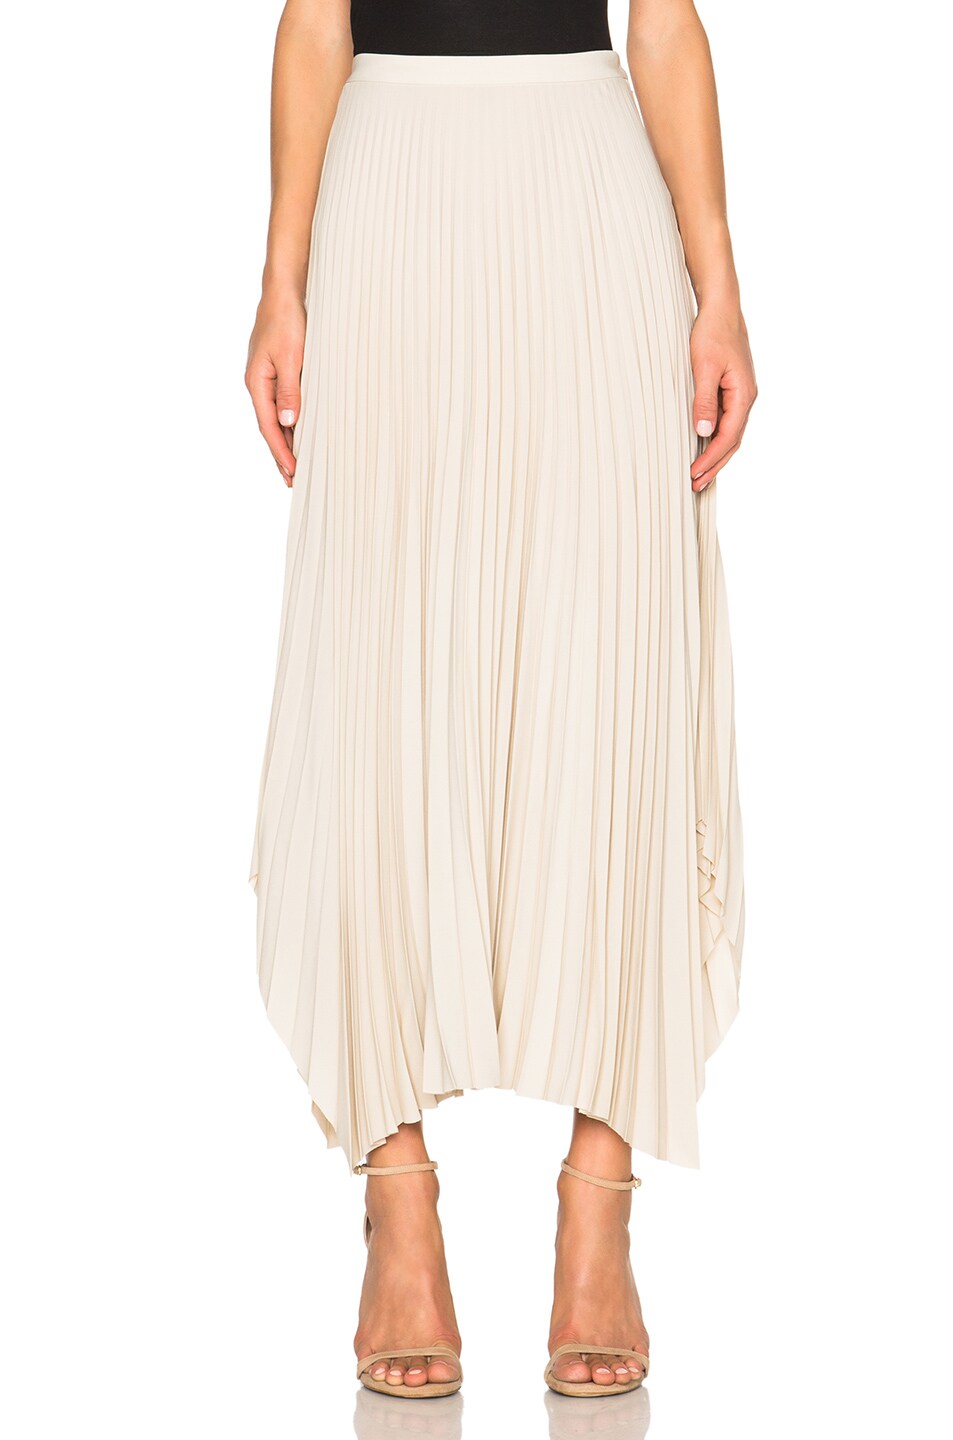 Helmut Lang Pleated Skirt in Oyster | FWRD